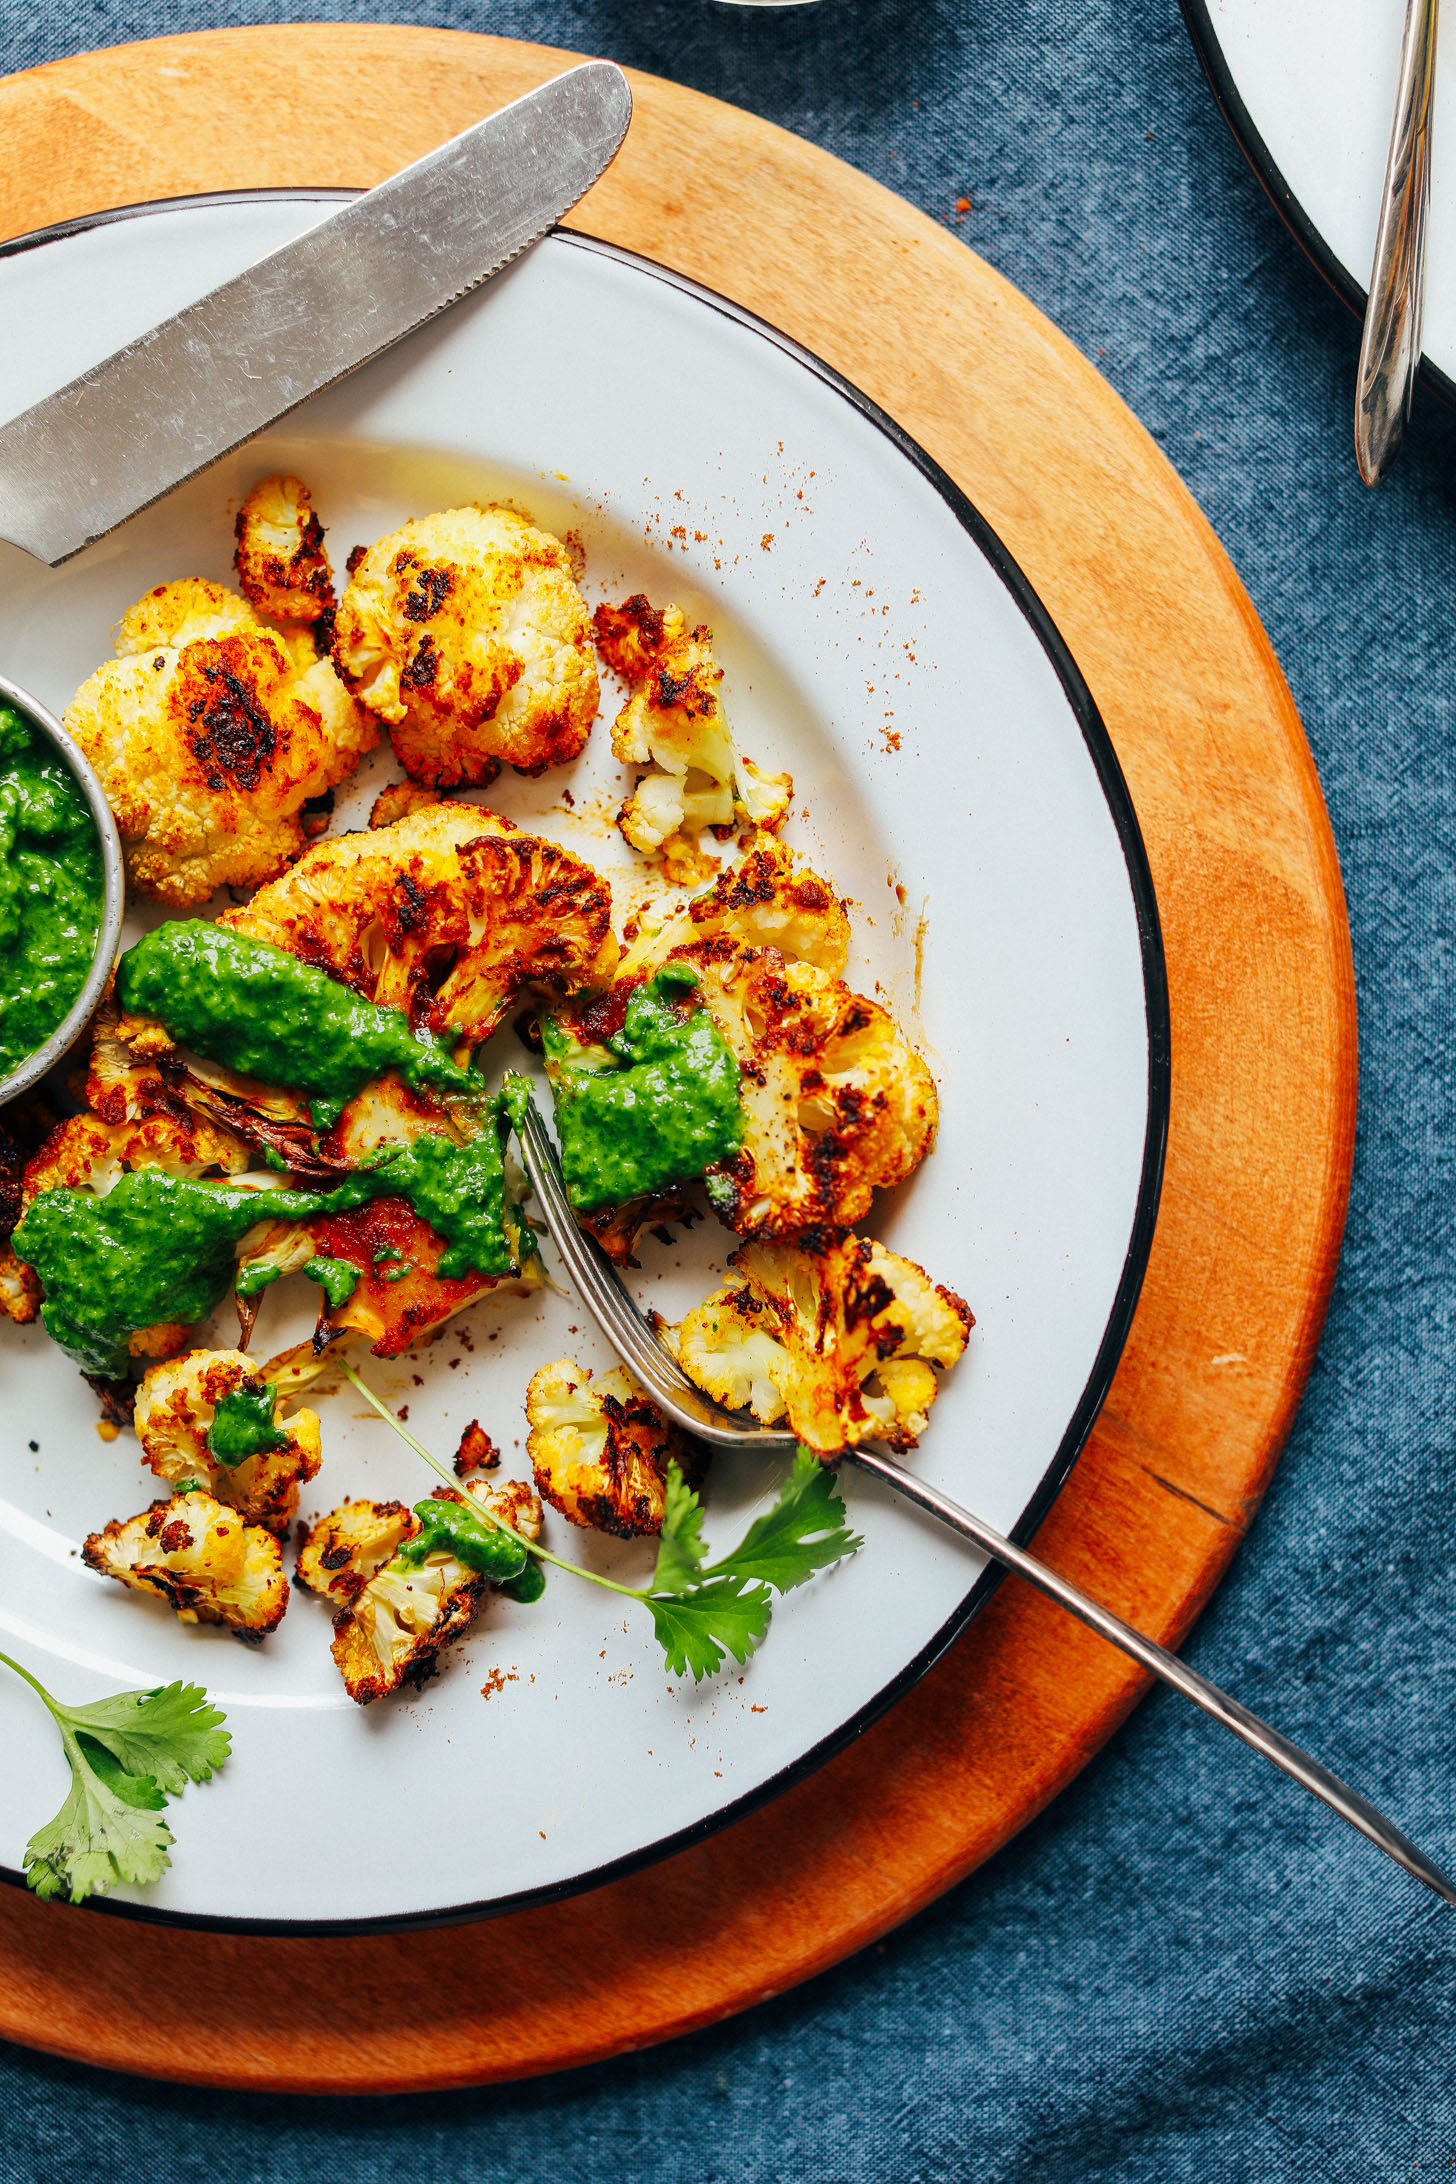 Plate with Shawarma Roasted Cauliflower Steak and Green Chutney for a delicious plant-based meal